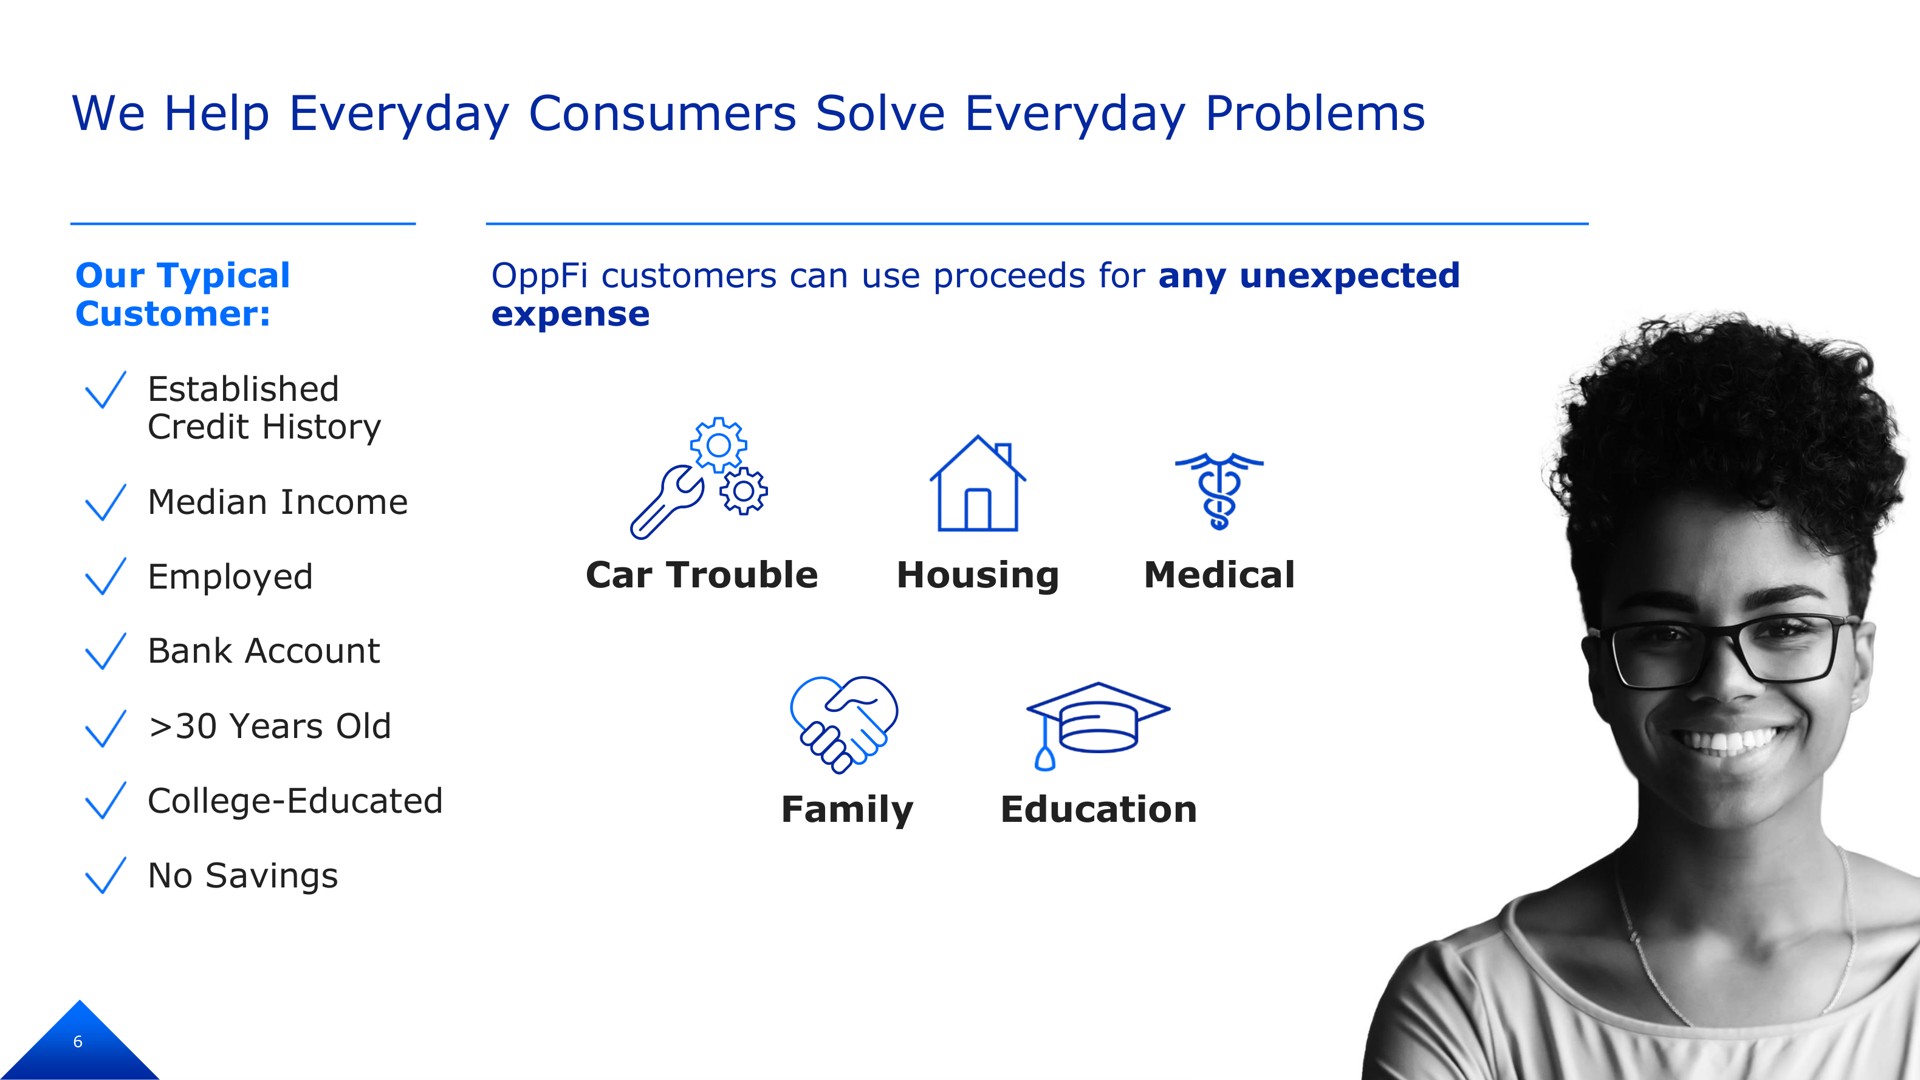 we help everyday consumers solve everyday problems our typical customer customers can use proceeds for any unexpected expense established credit history median income employed car trouble housing medical bank account years old college educated no savings family education go a | OppFi